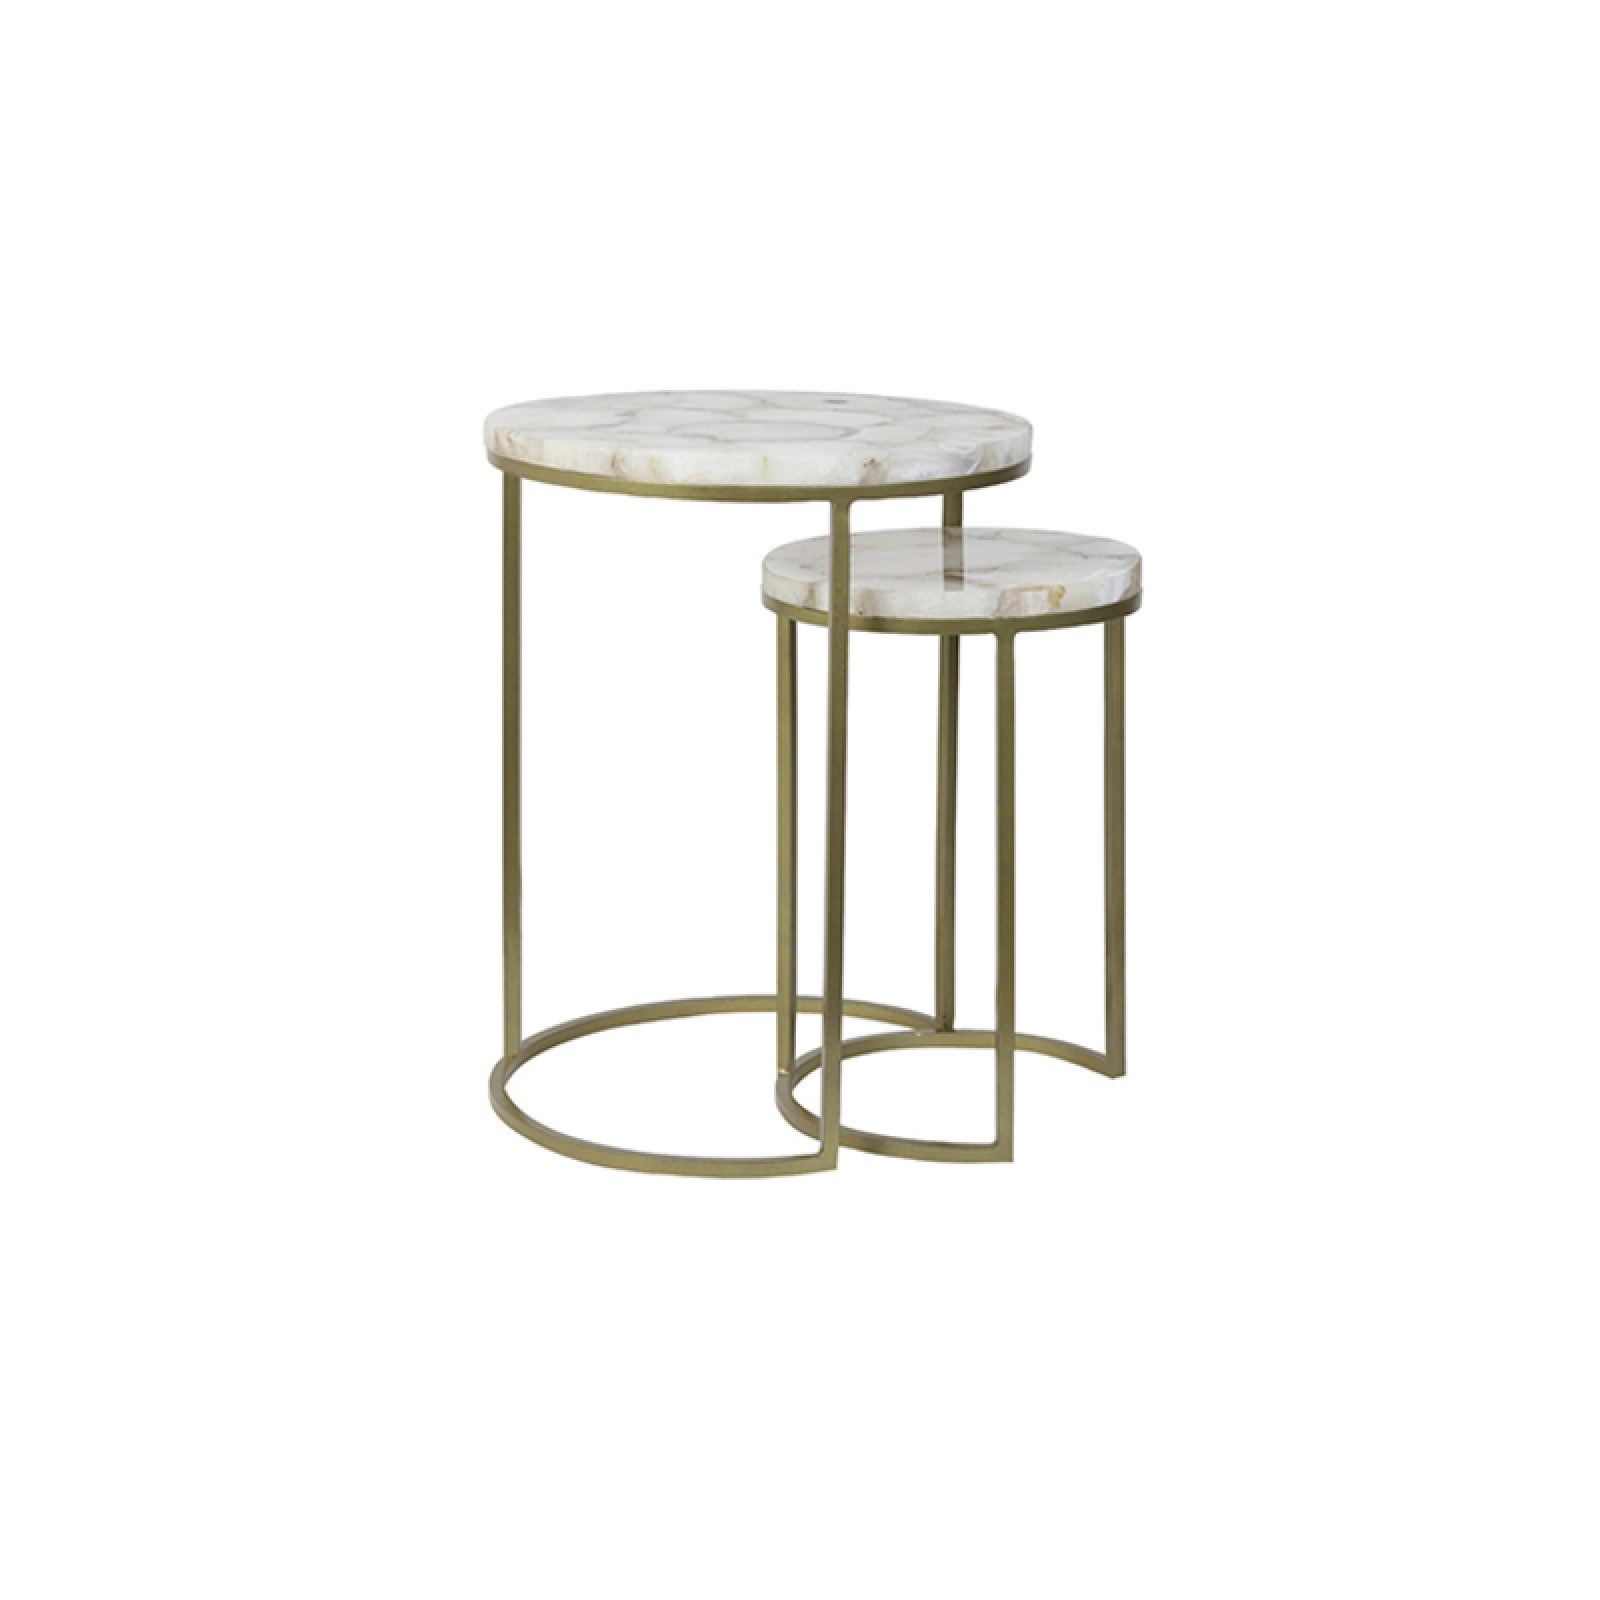 Axat side table set